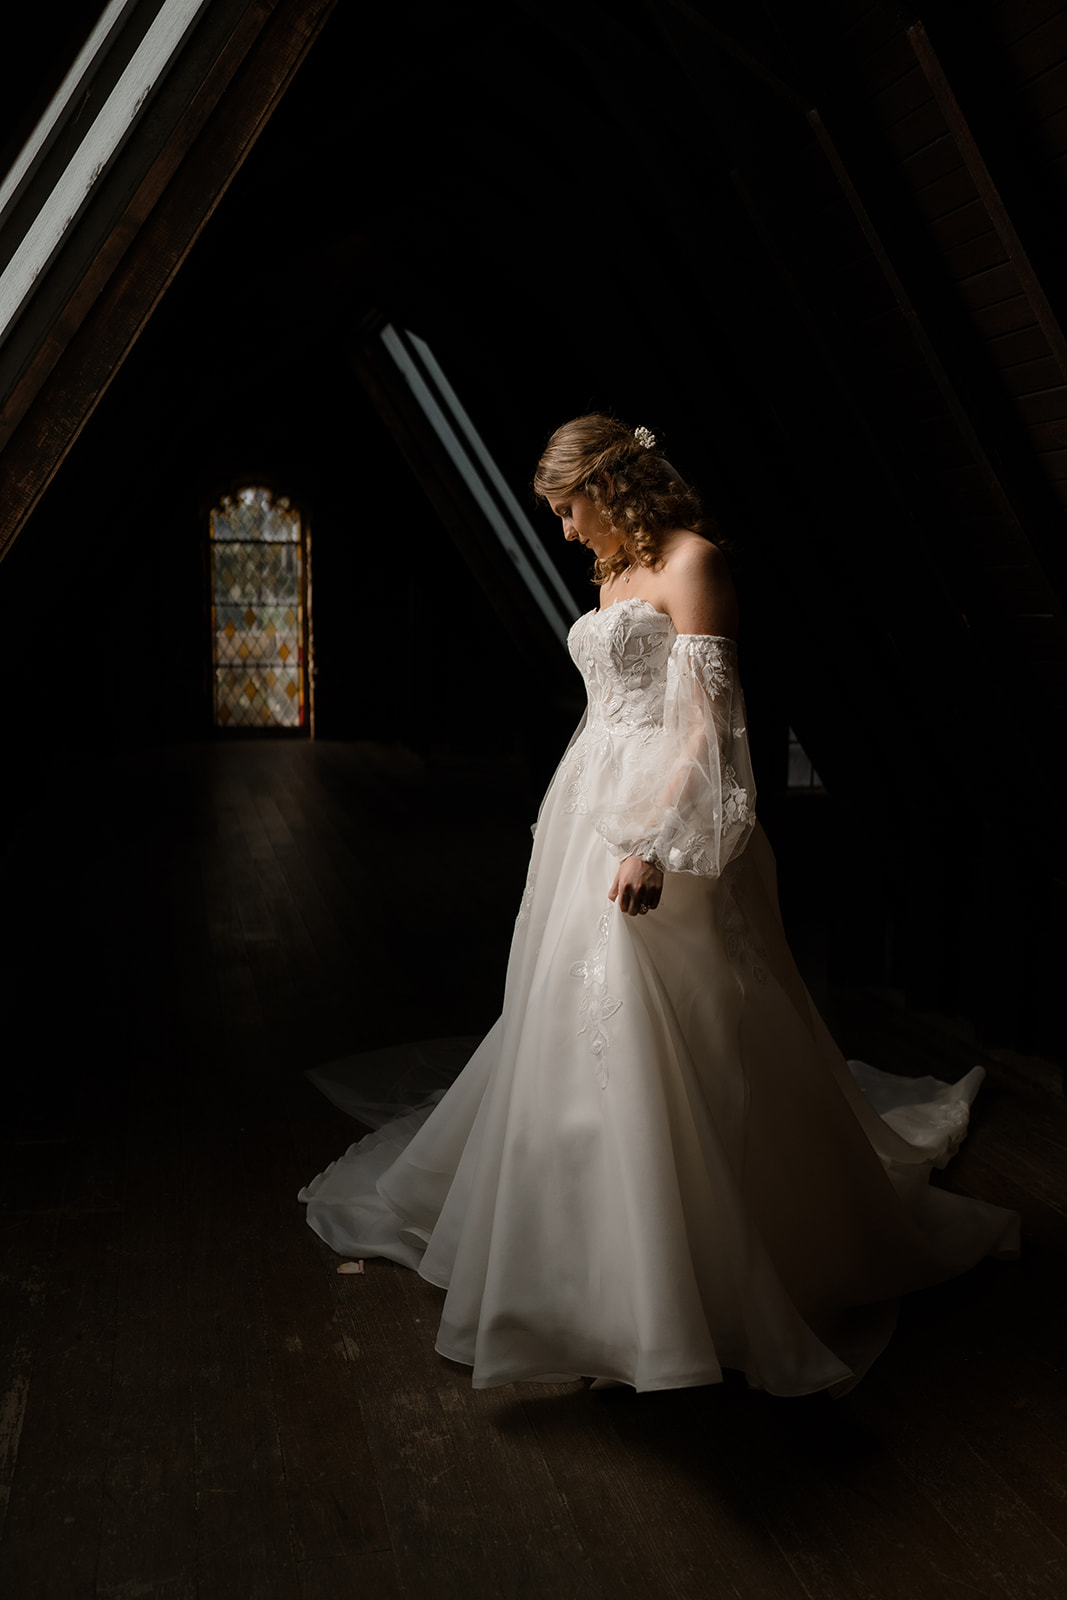 Frosted window light creates a dreamy atmosphere for bride's portrait at Montsalvat.